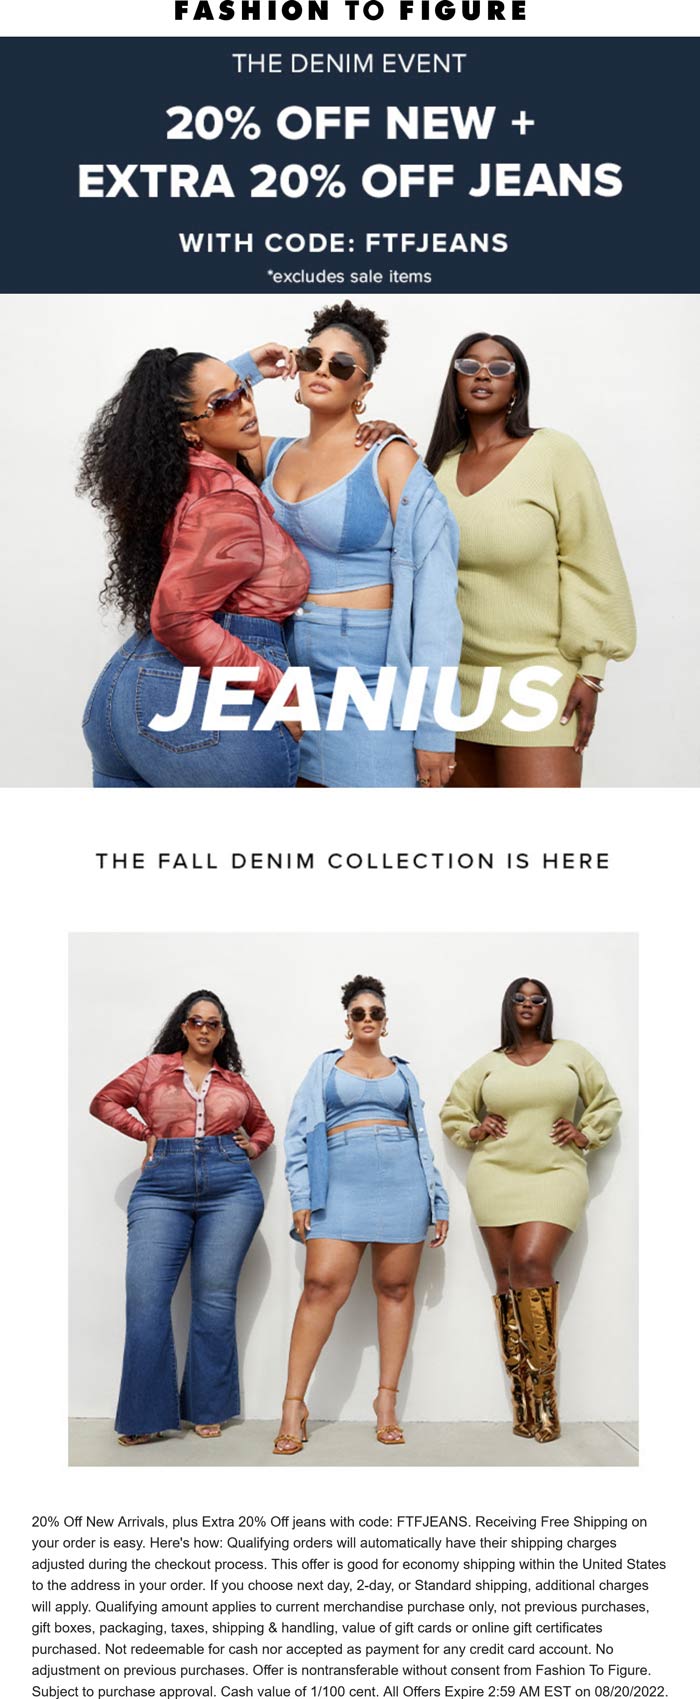 Fashion to Figure stores Coupon  20% off jeans & new styles at Fashion to Figure via promo code FTFJEANS #fashiontofigure 